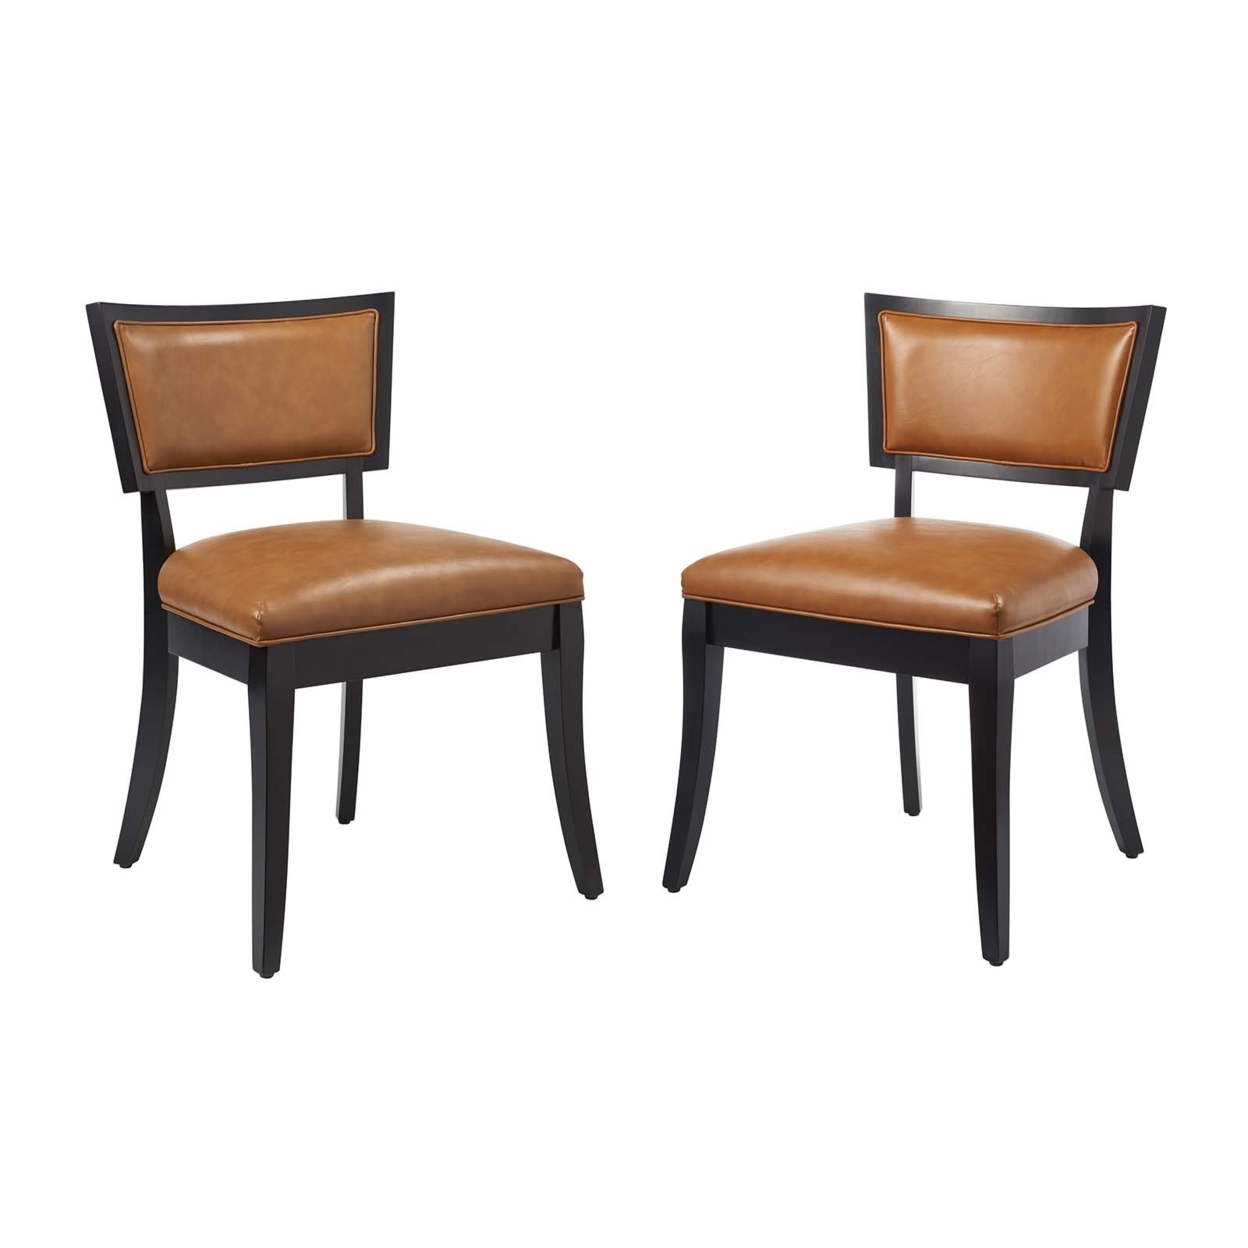 Pristine Vegan Leather Dining Chairs - Set Of 2